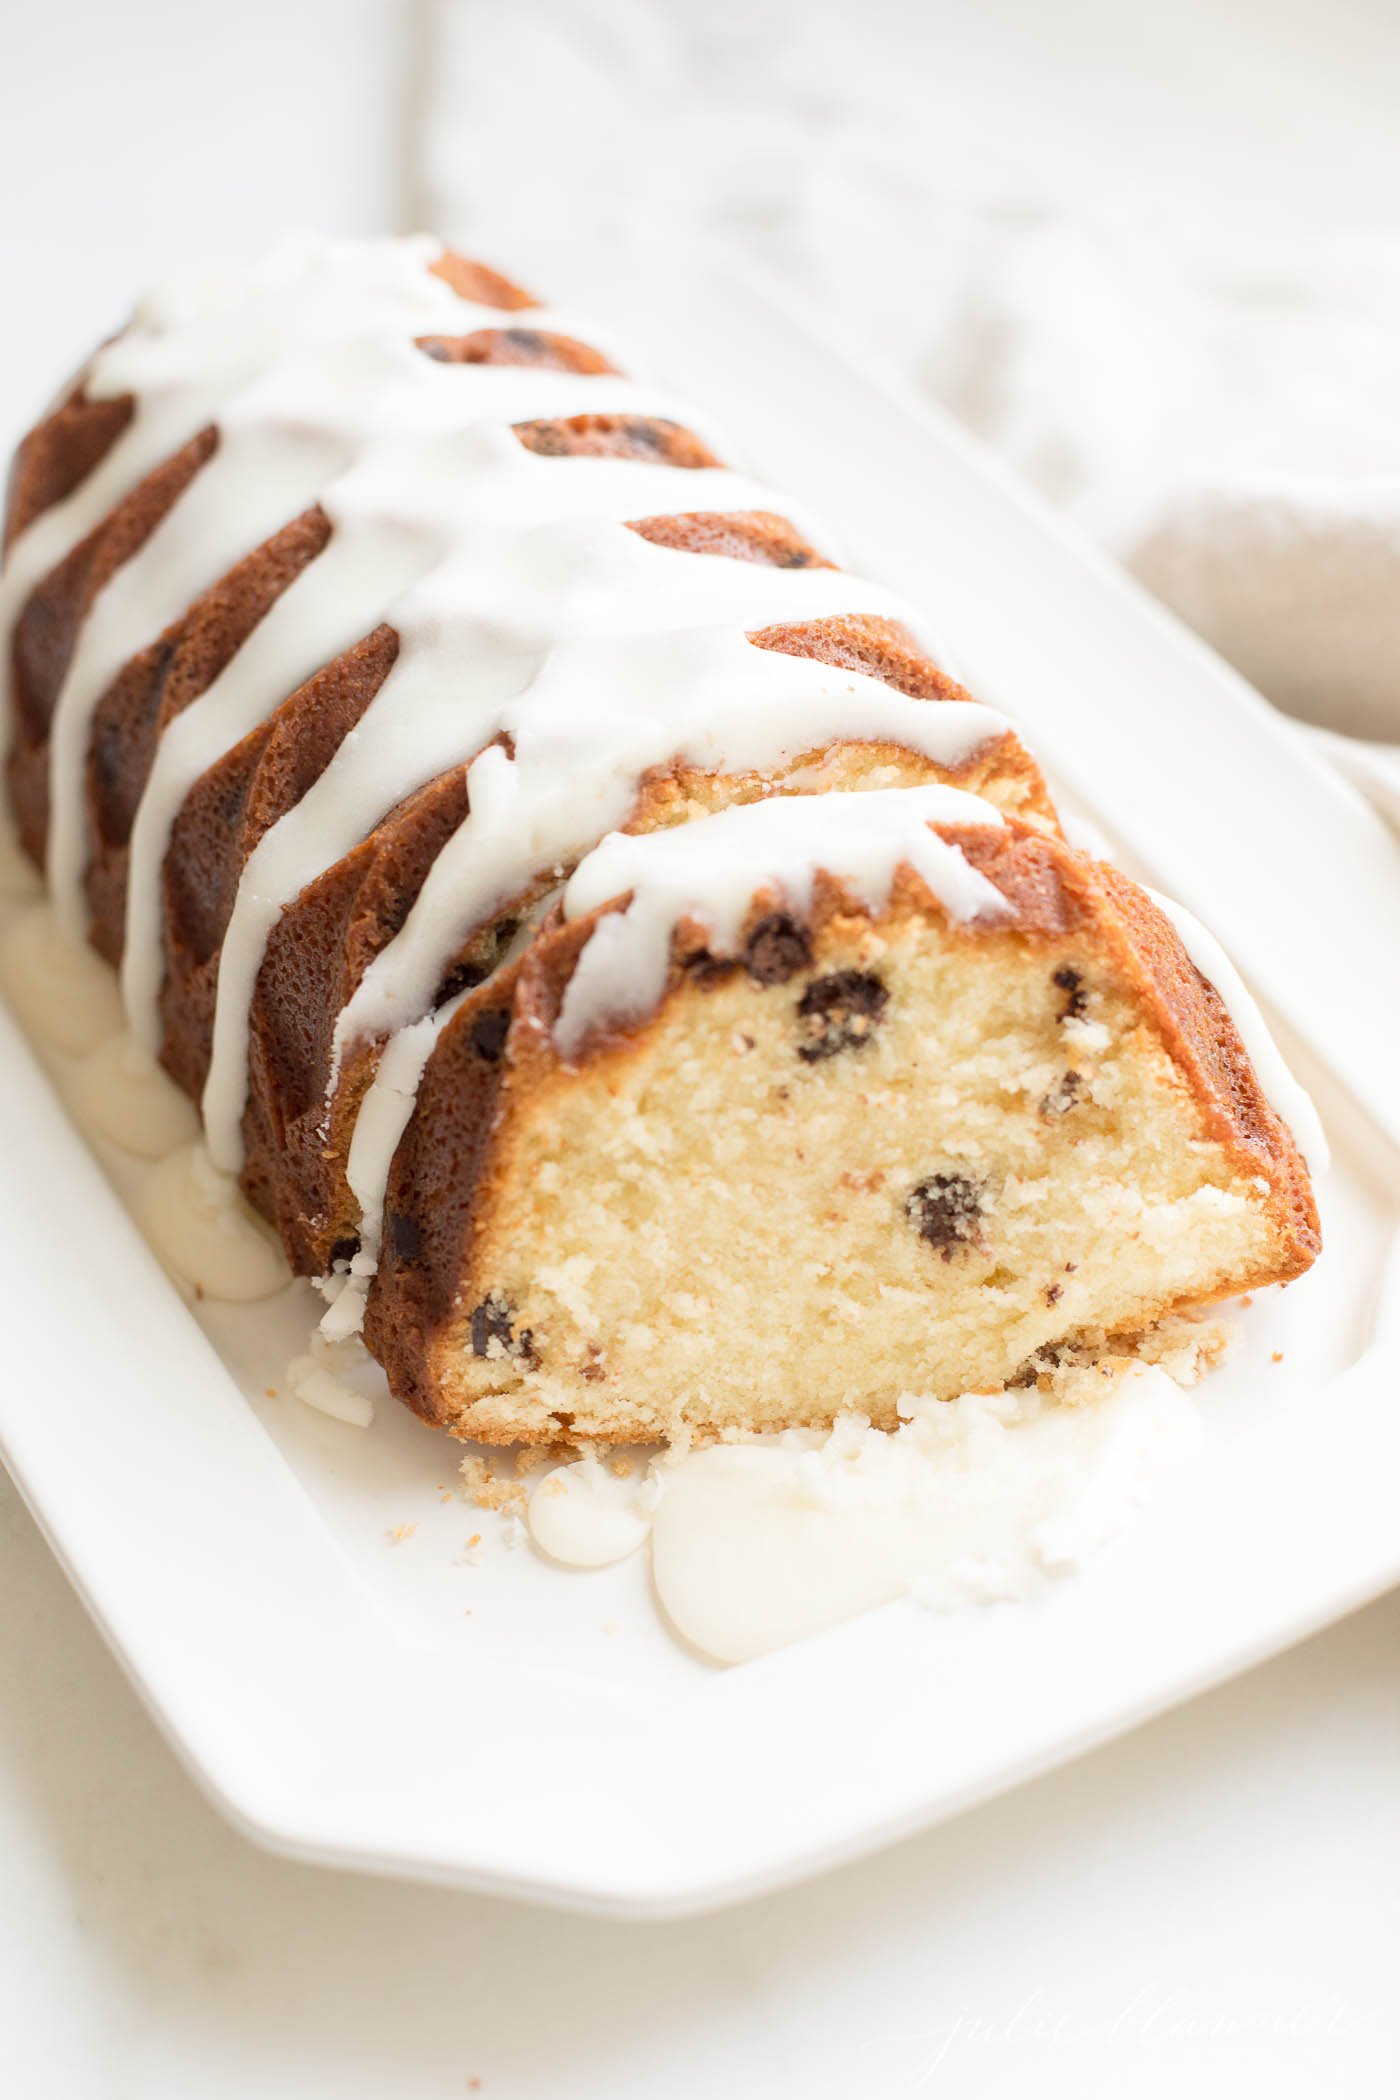 A chocolate chip pound cake on a white serving platter